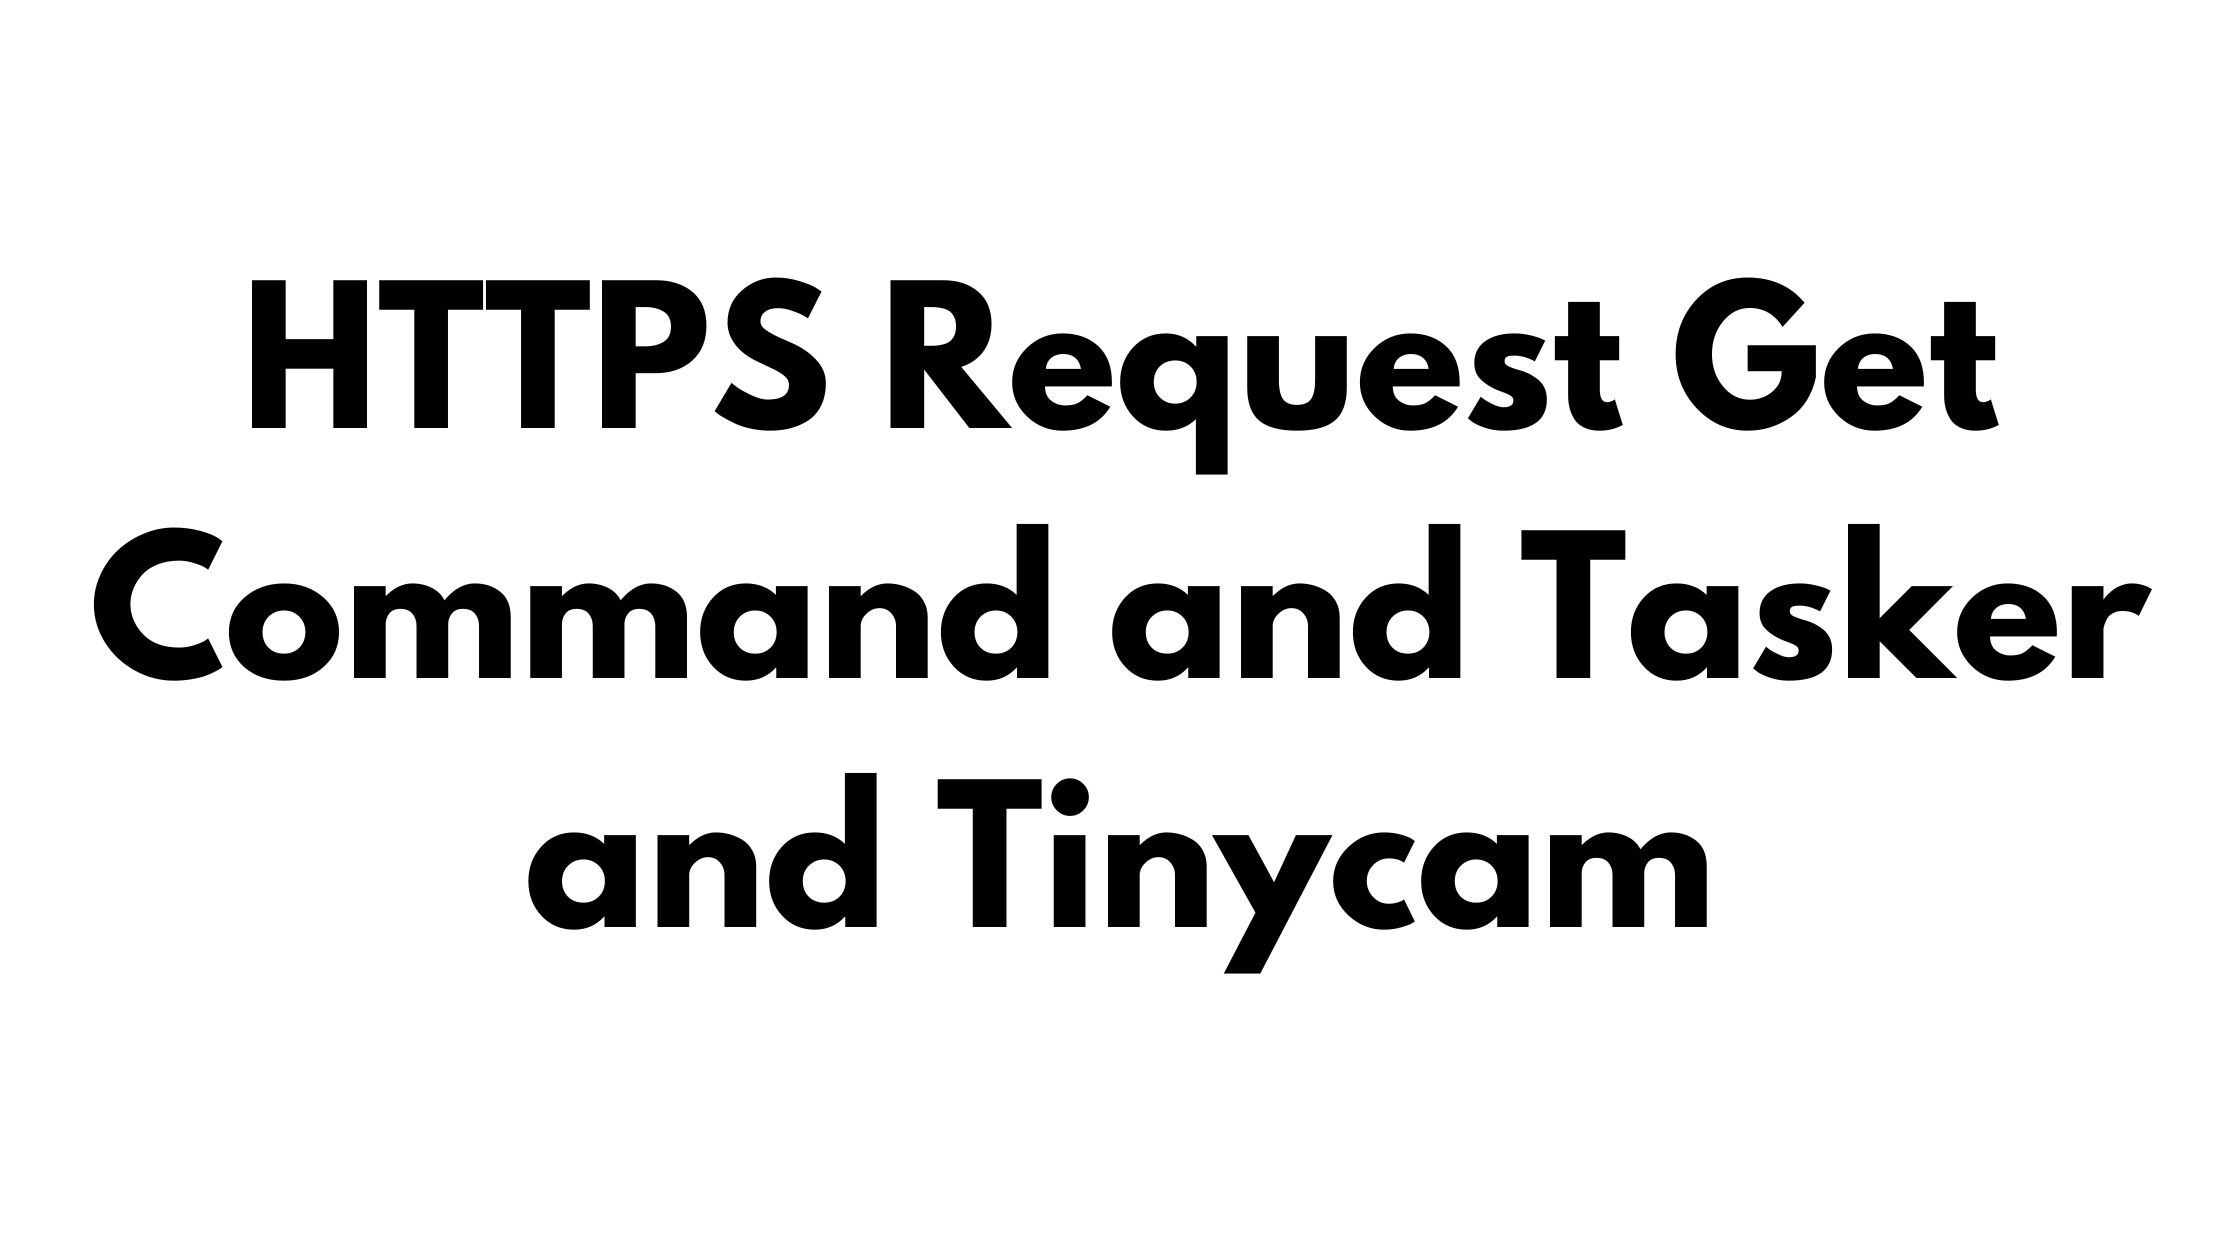 HTTPS Request Get Command and Tasker and Tinycam